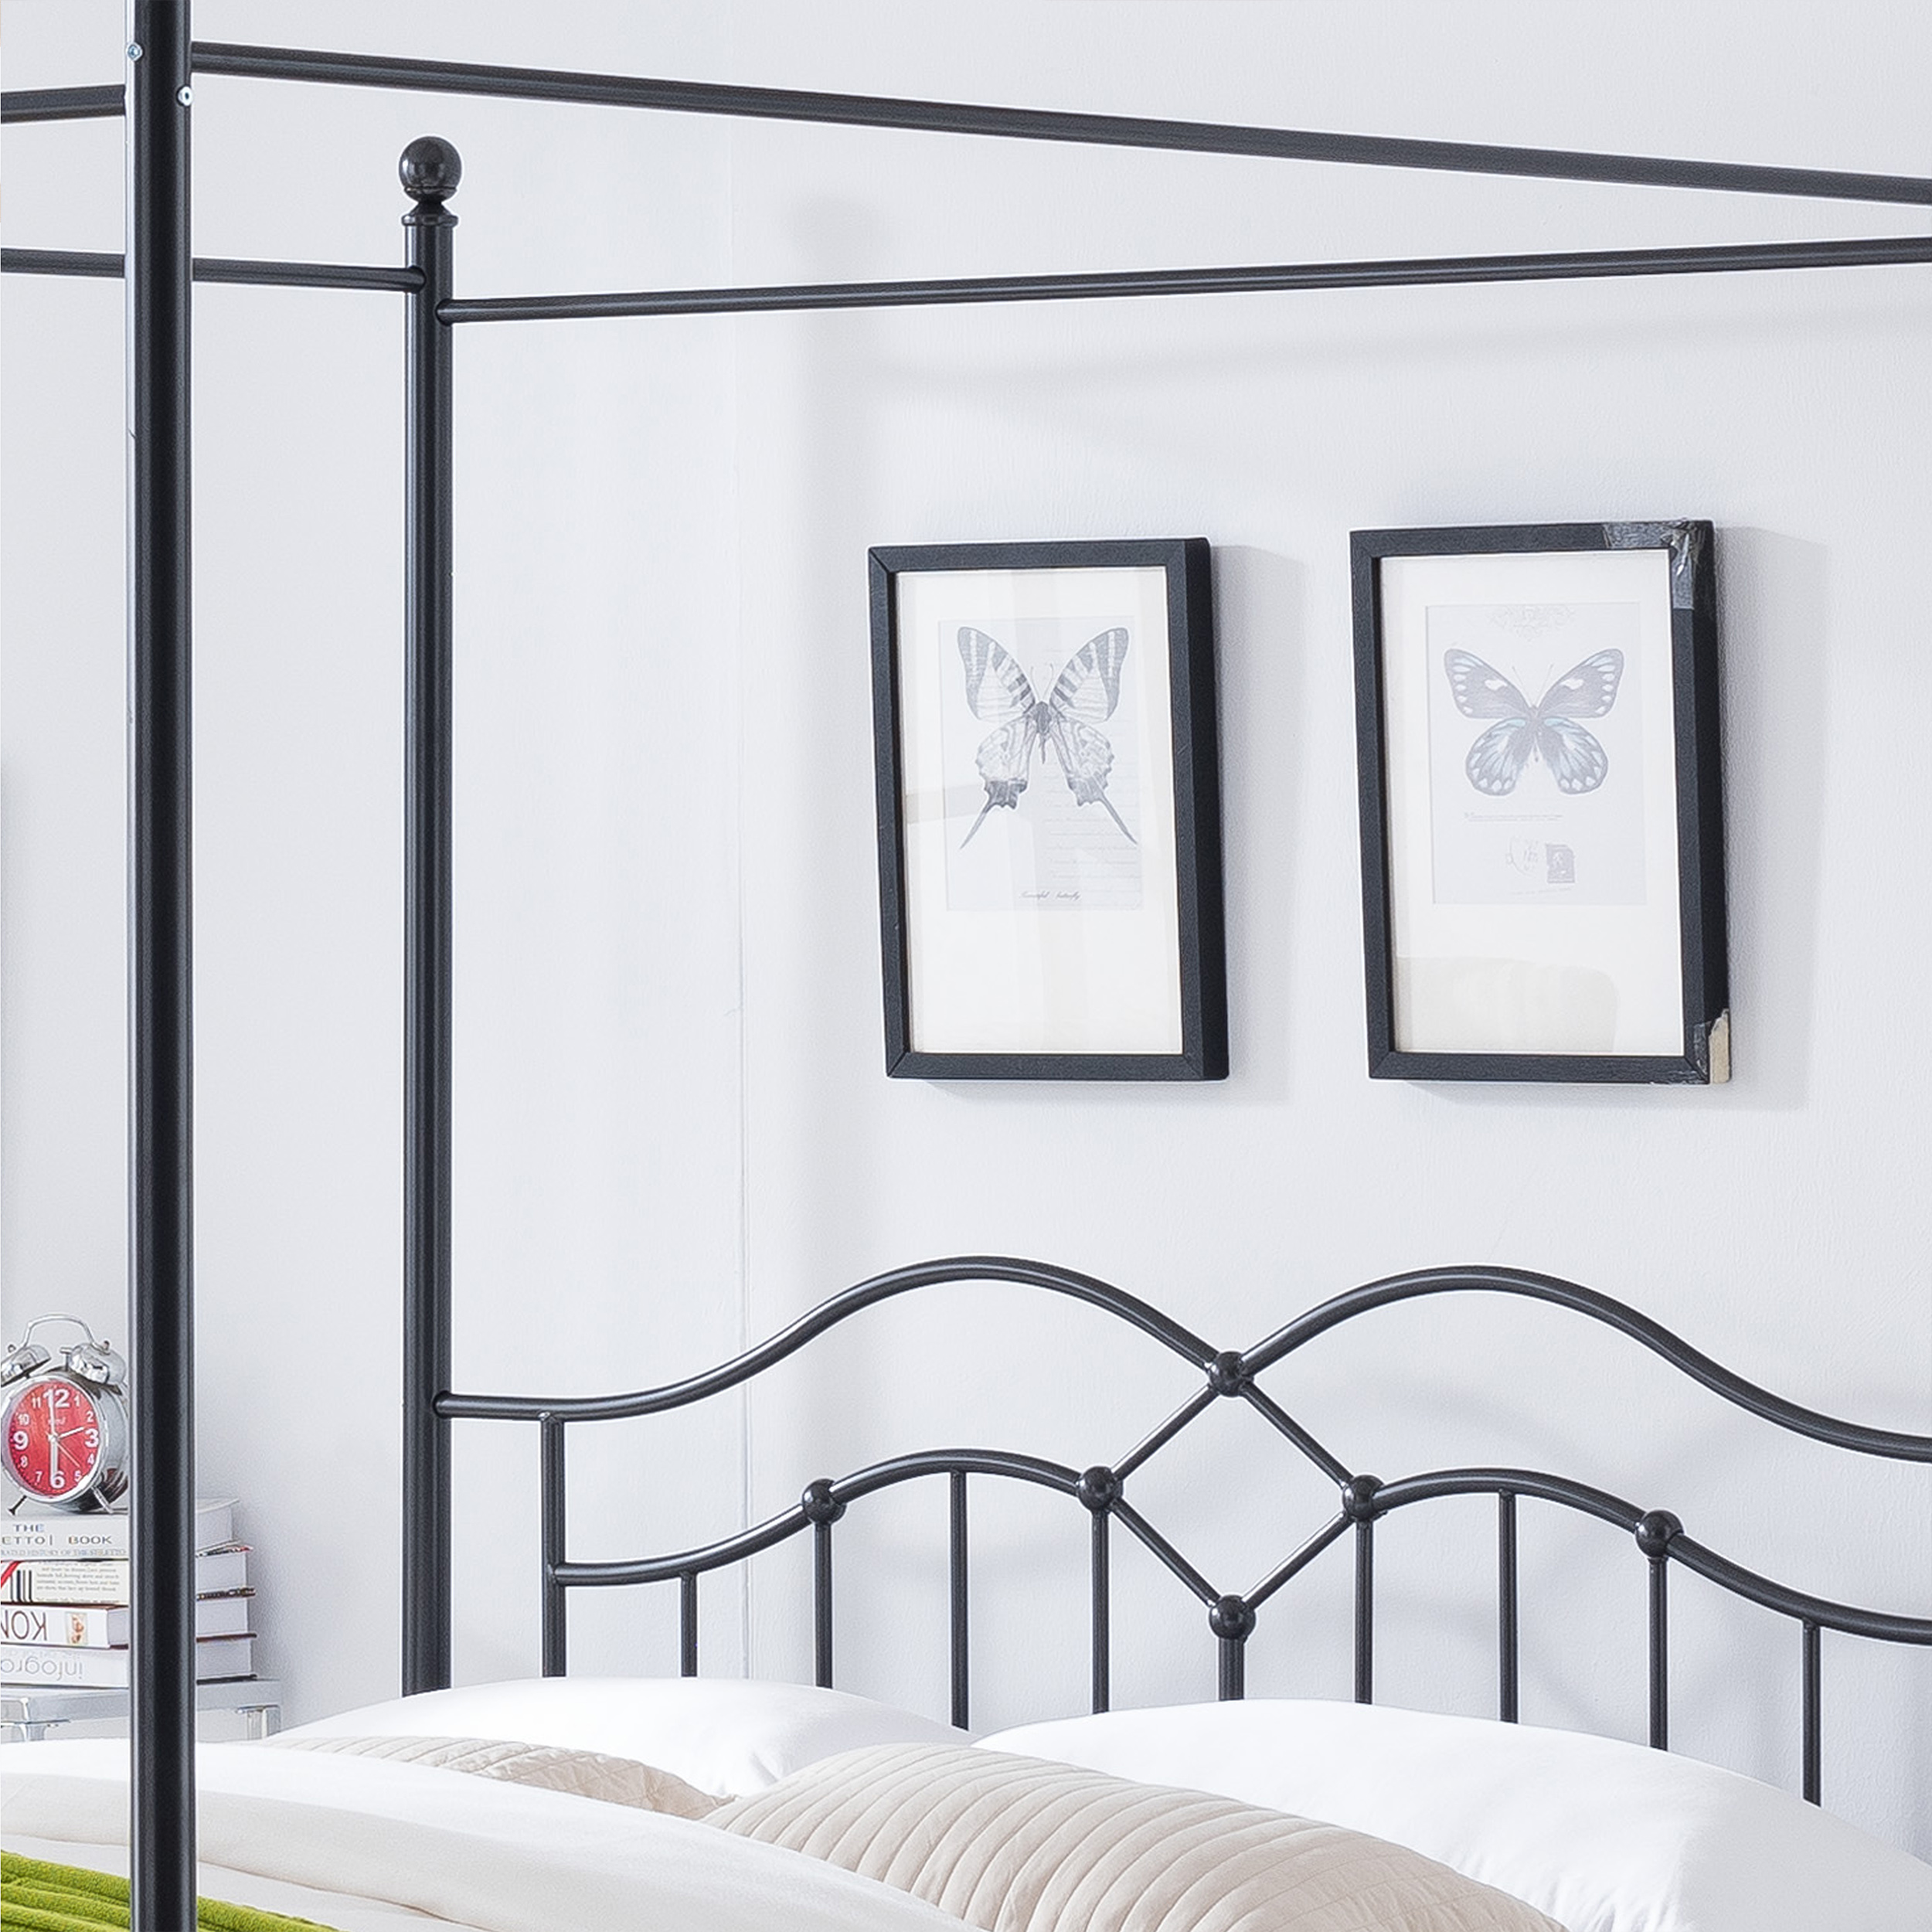 Noble House Selene Traditional Iron Canopy Queen Bed Frame, Charcoal Gray - image 3 of 7